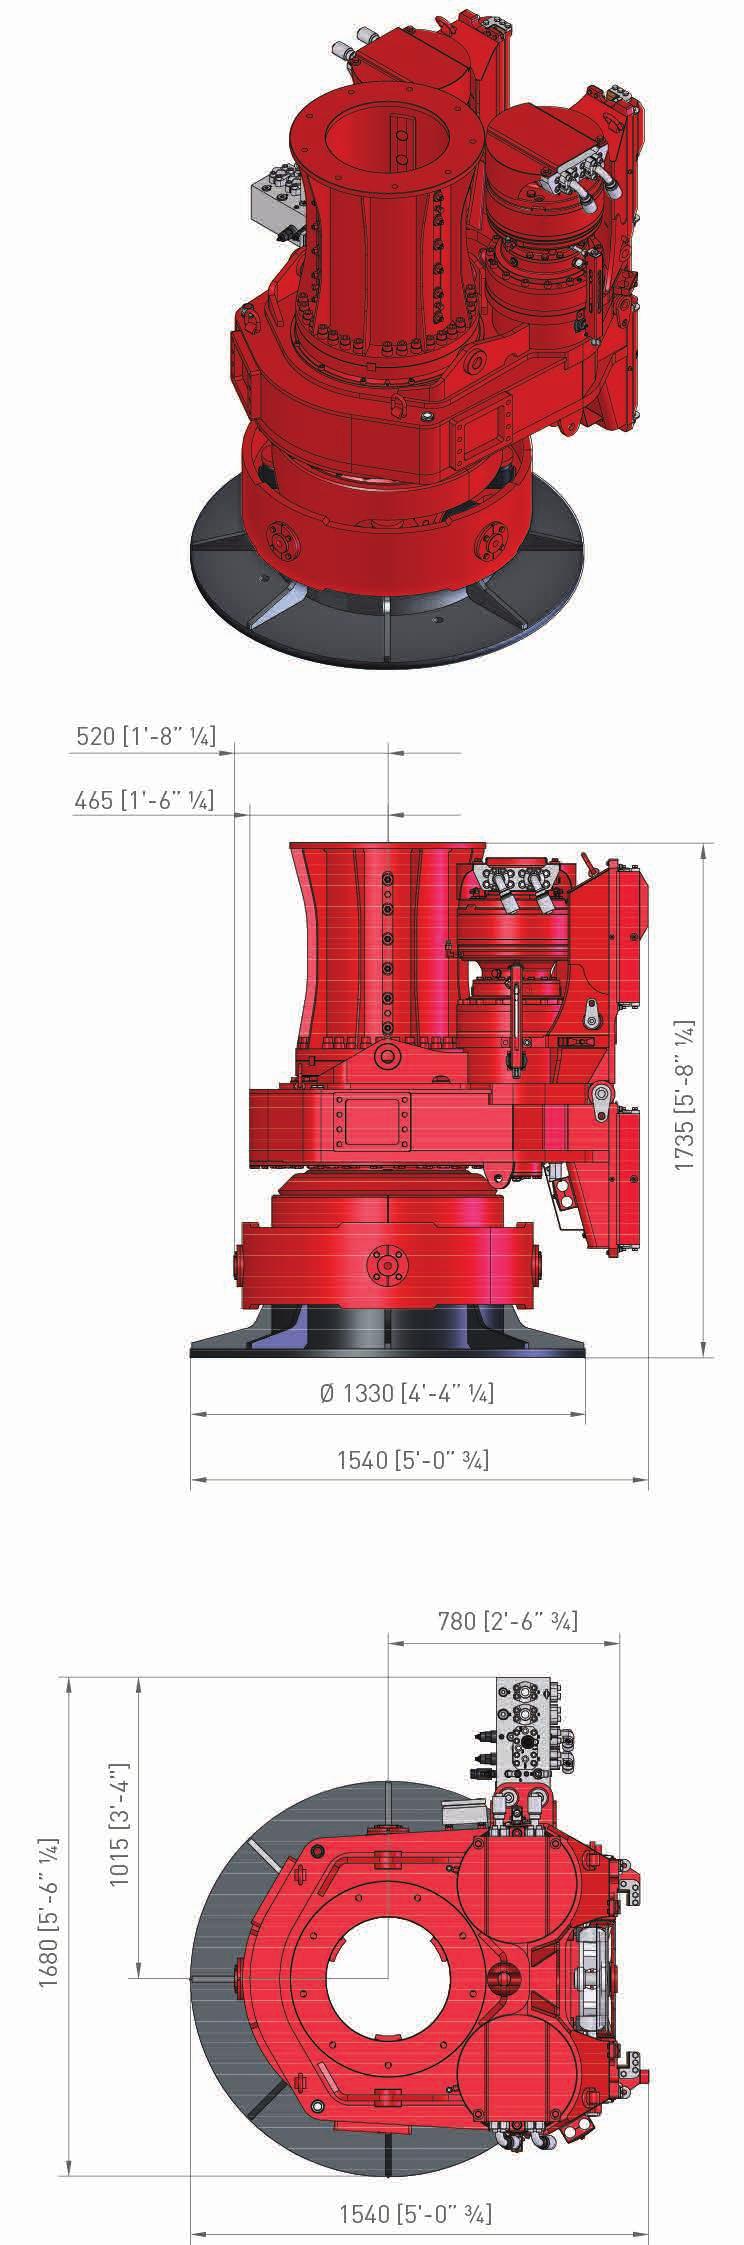 Rotary Head CH 450 - Torque Diagram 190,0 165,0 TORQUE (knm) 28,2 15,5 11,7 0 0 7,7 8,9 51,8 SPEED (rpm) 94,5 125,0 drilling (max pressure) drilling (set pressure) spin-off CH 450 soil mix 85,1 65,1